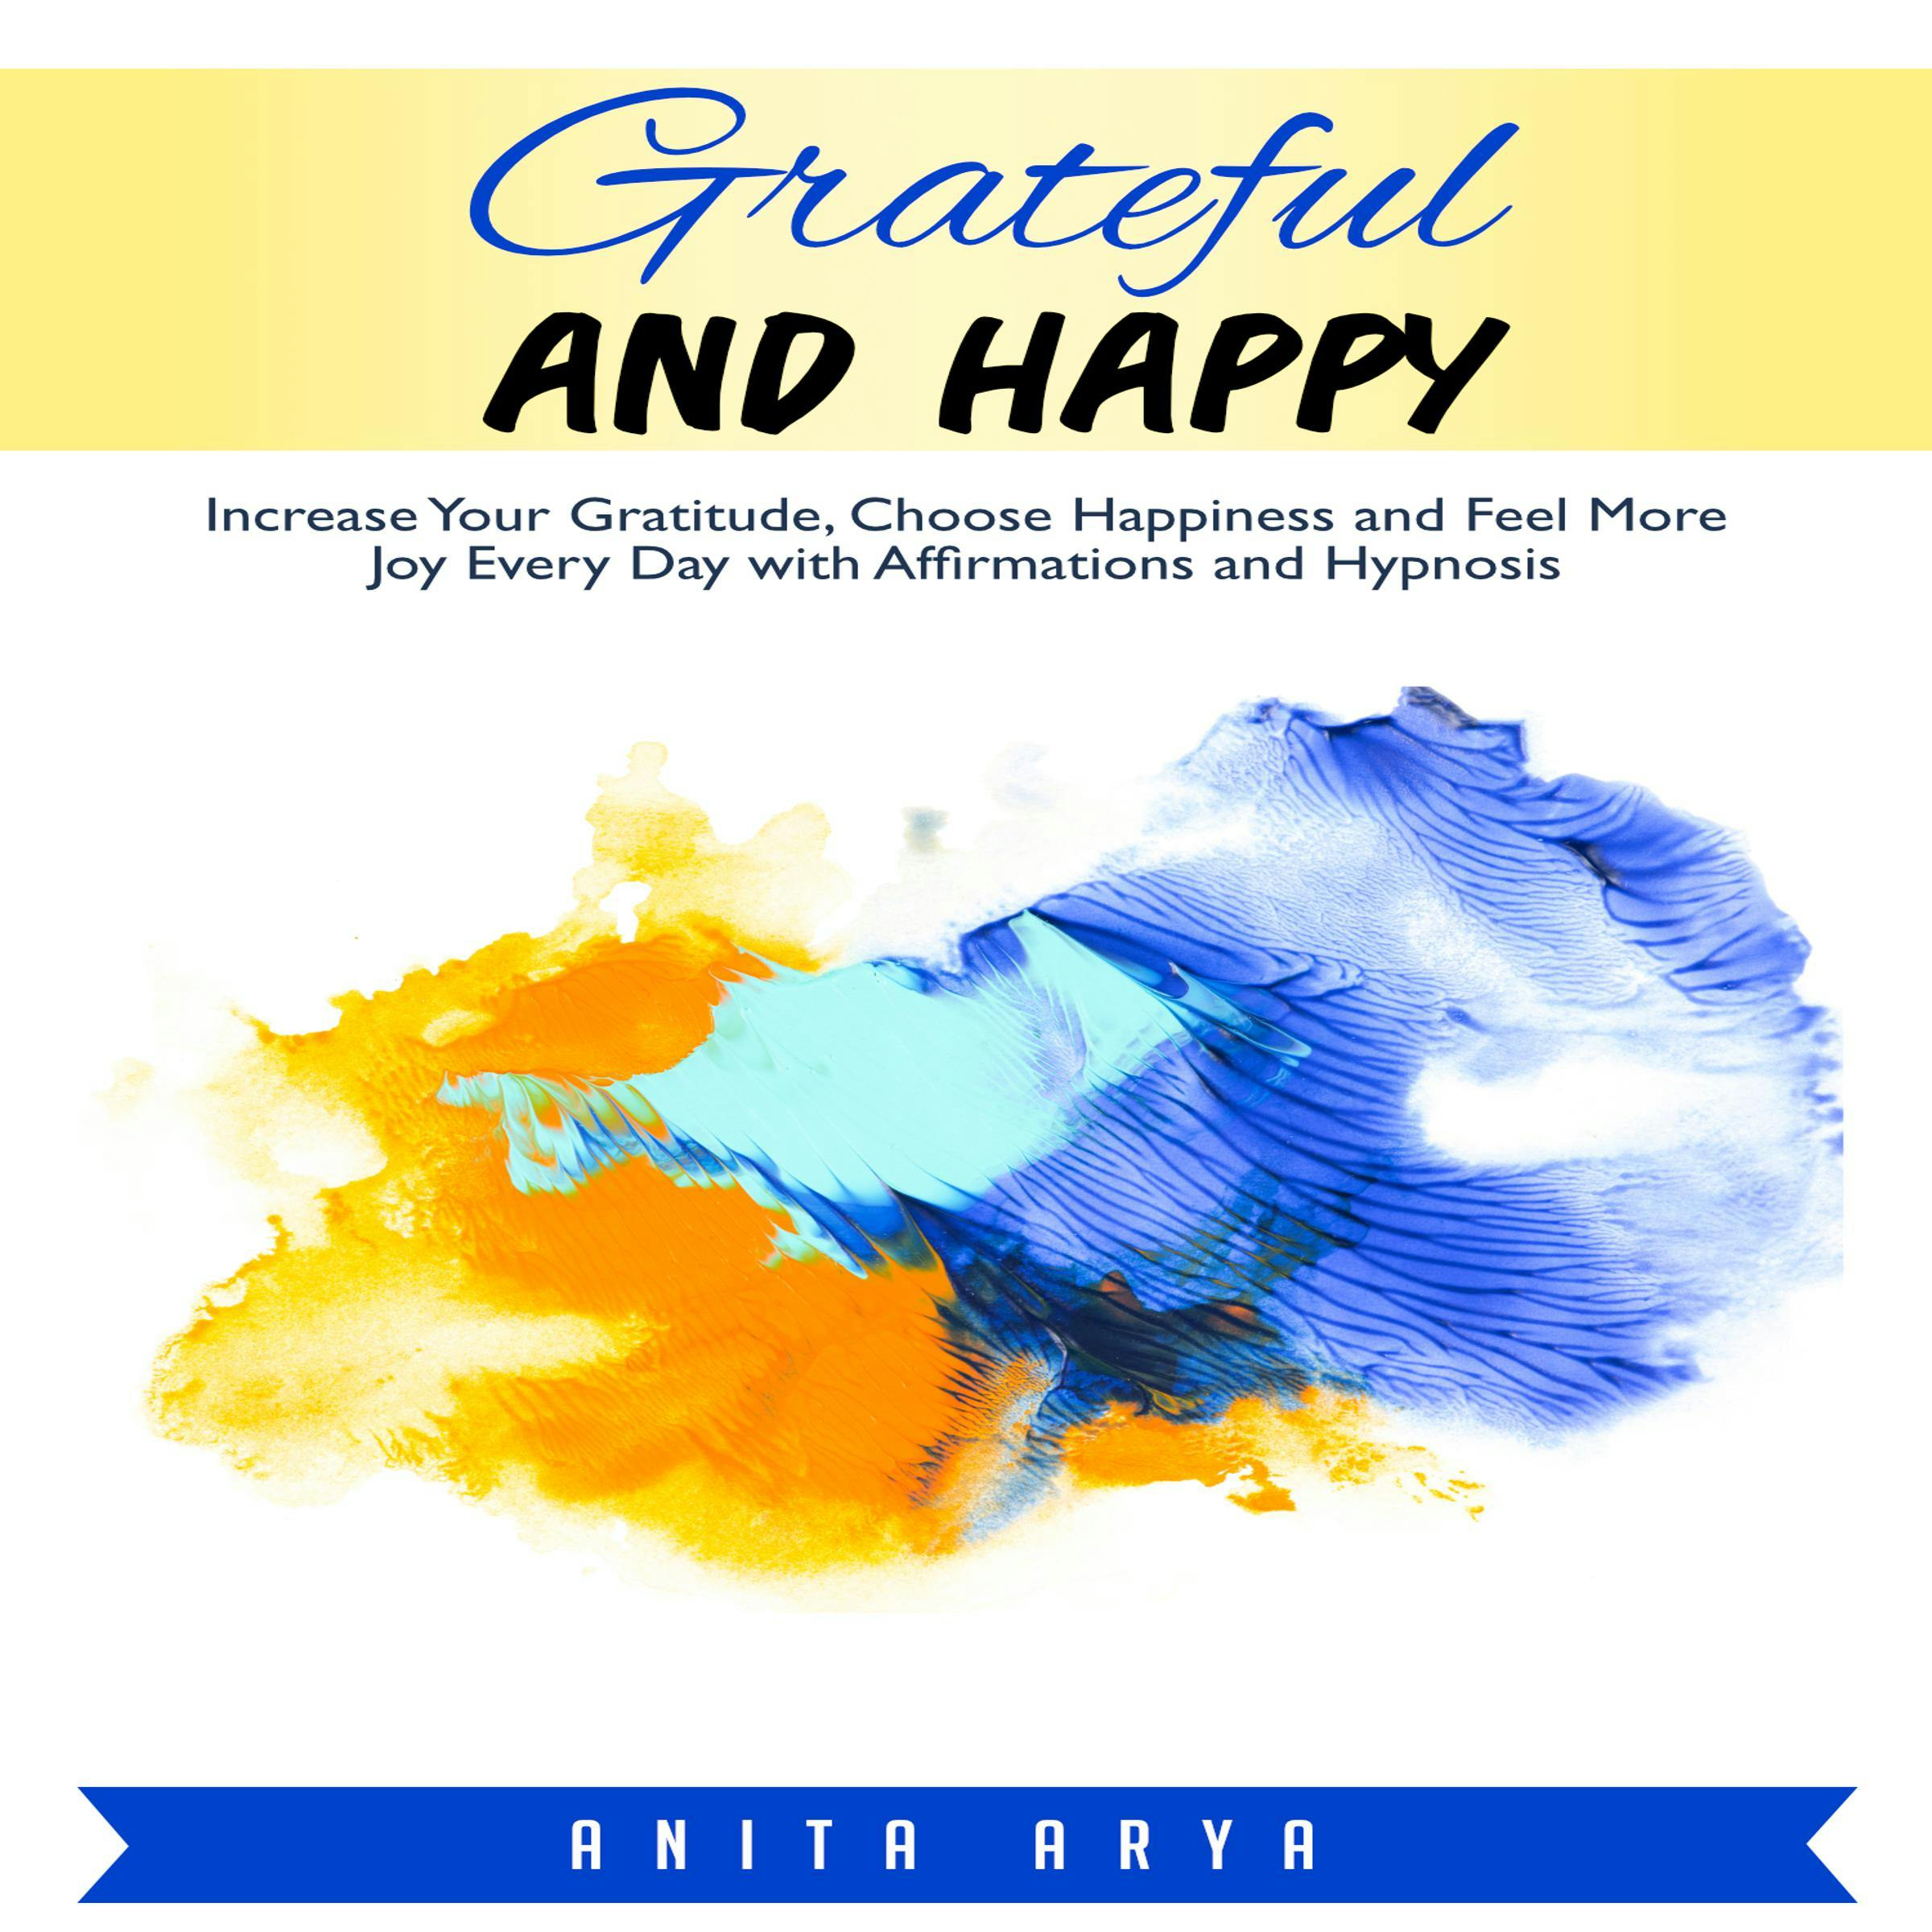 Grateful and Happy: Increase Your Gratitude, Choose Happiness and Feel More Joy Every Day with Affirmations and Hypnosis - Anita Arya